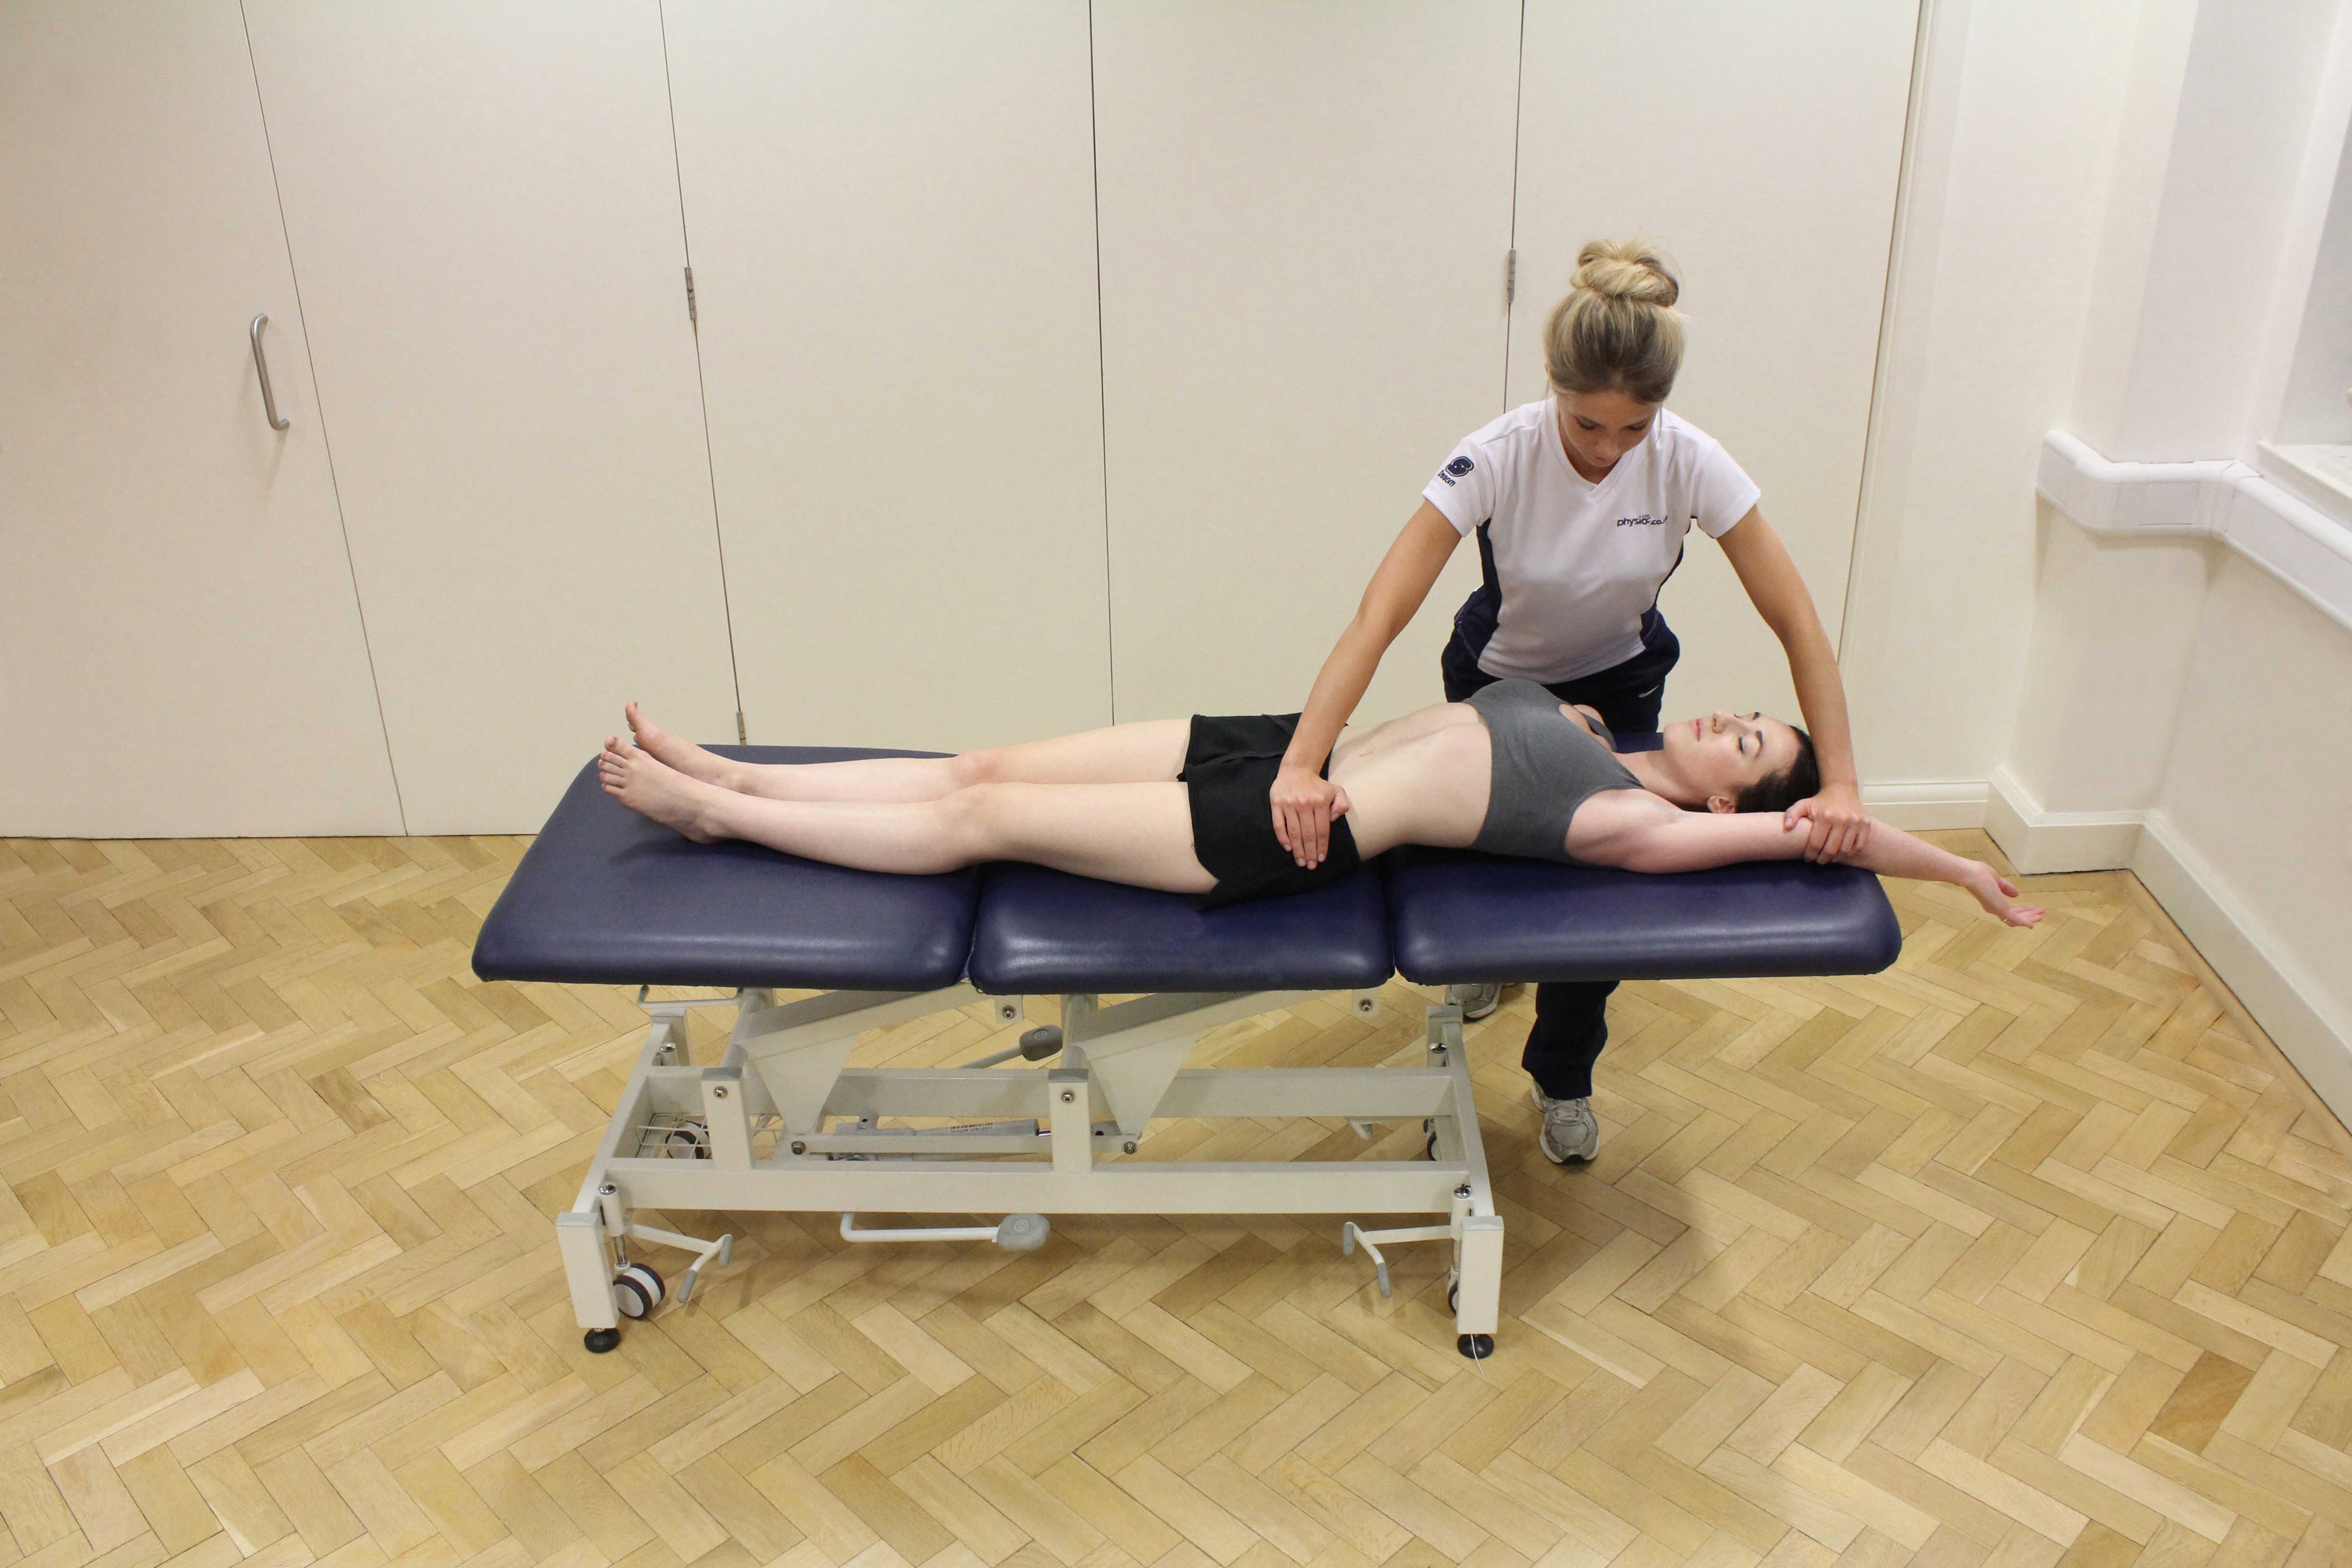 Massage can help imporve flexibility which will help reduce the likelihood of injury occuring